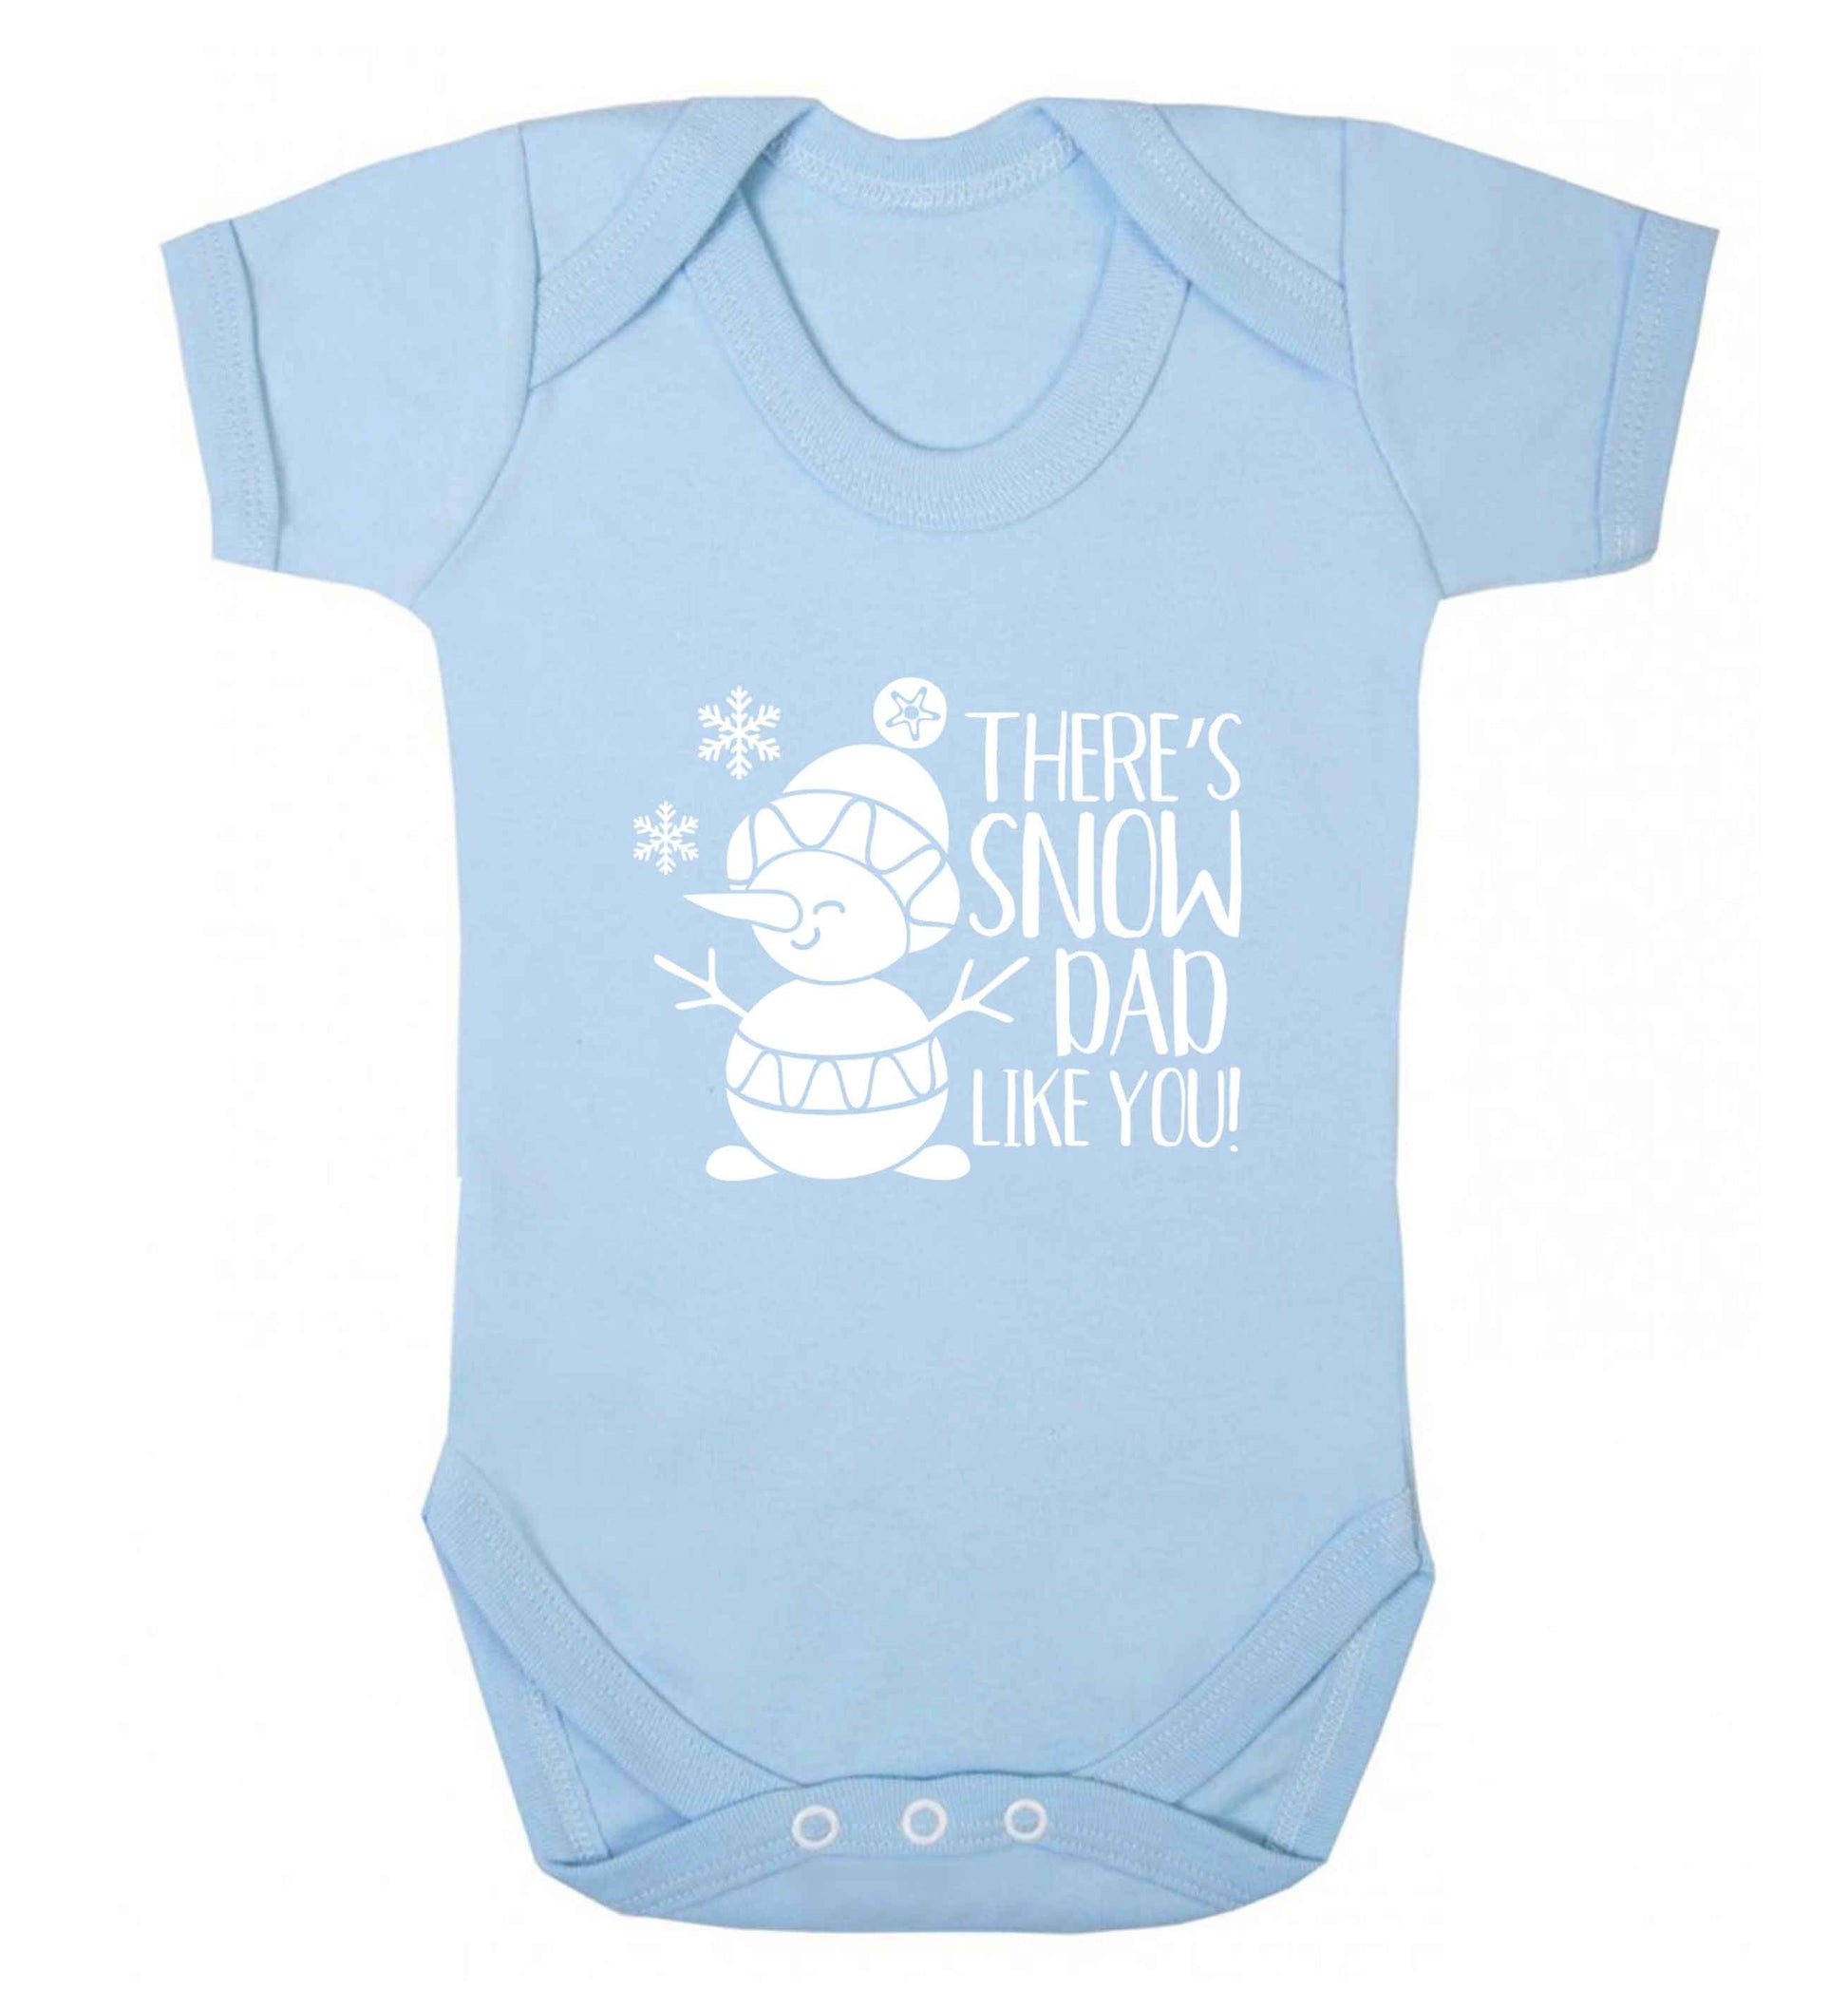 There's snow dad like you baby vest pale blue 18-24 months